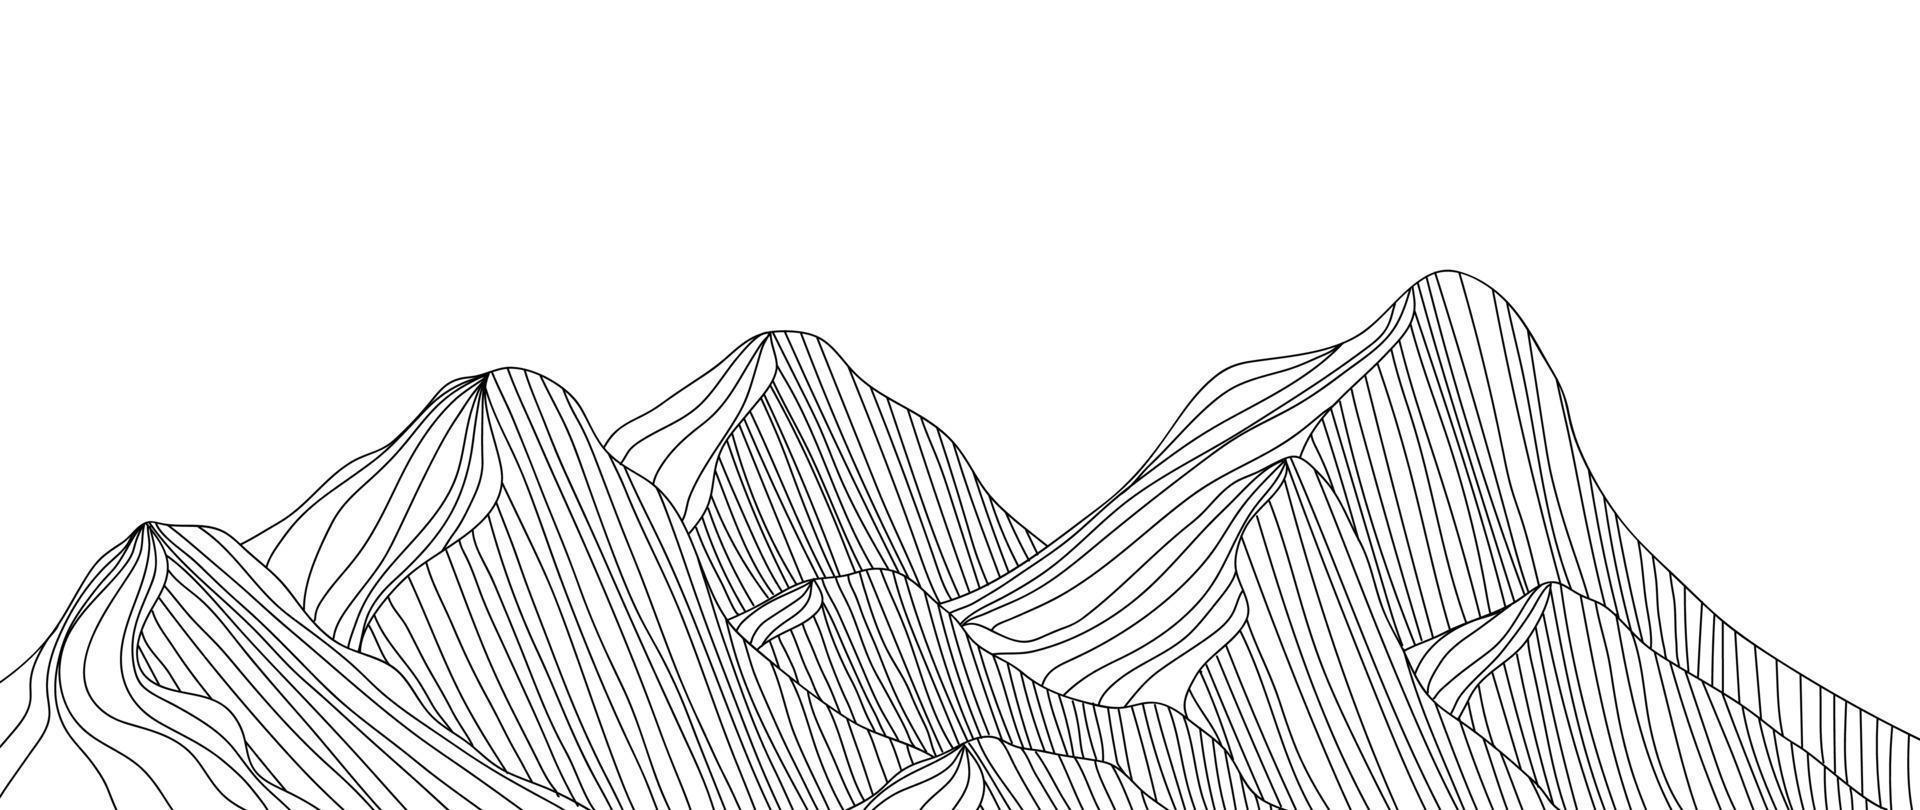 Black and white mountain line art wallpaper. Contour drawing luxury scenic landscape background design illustration for cover, invitation background, packaging design, fabric, banner and print. vector